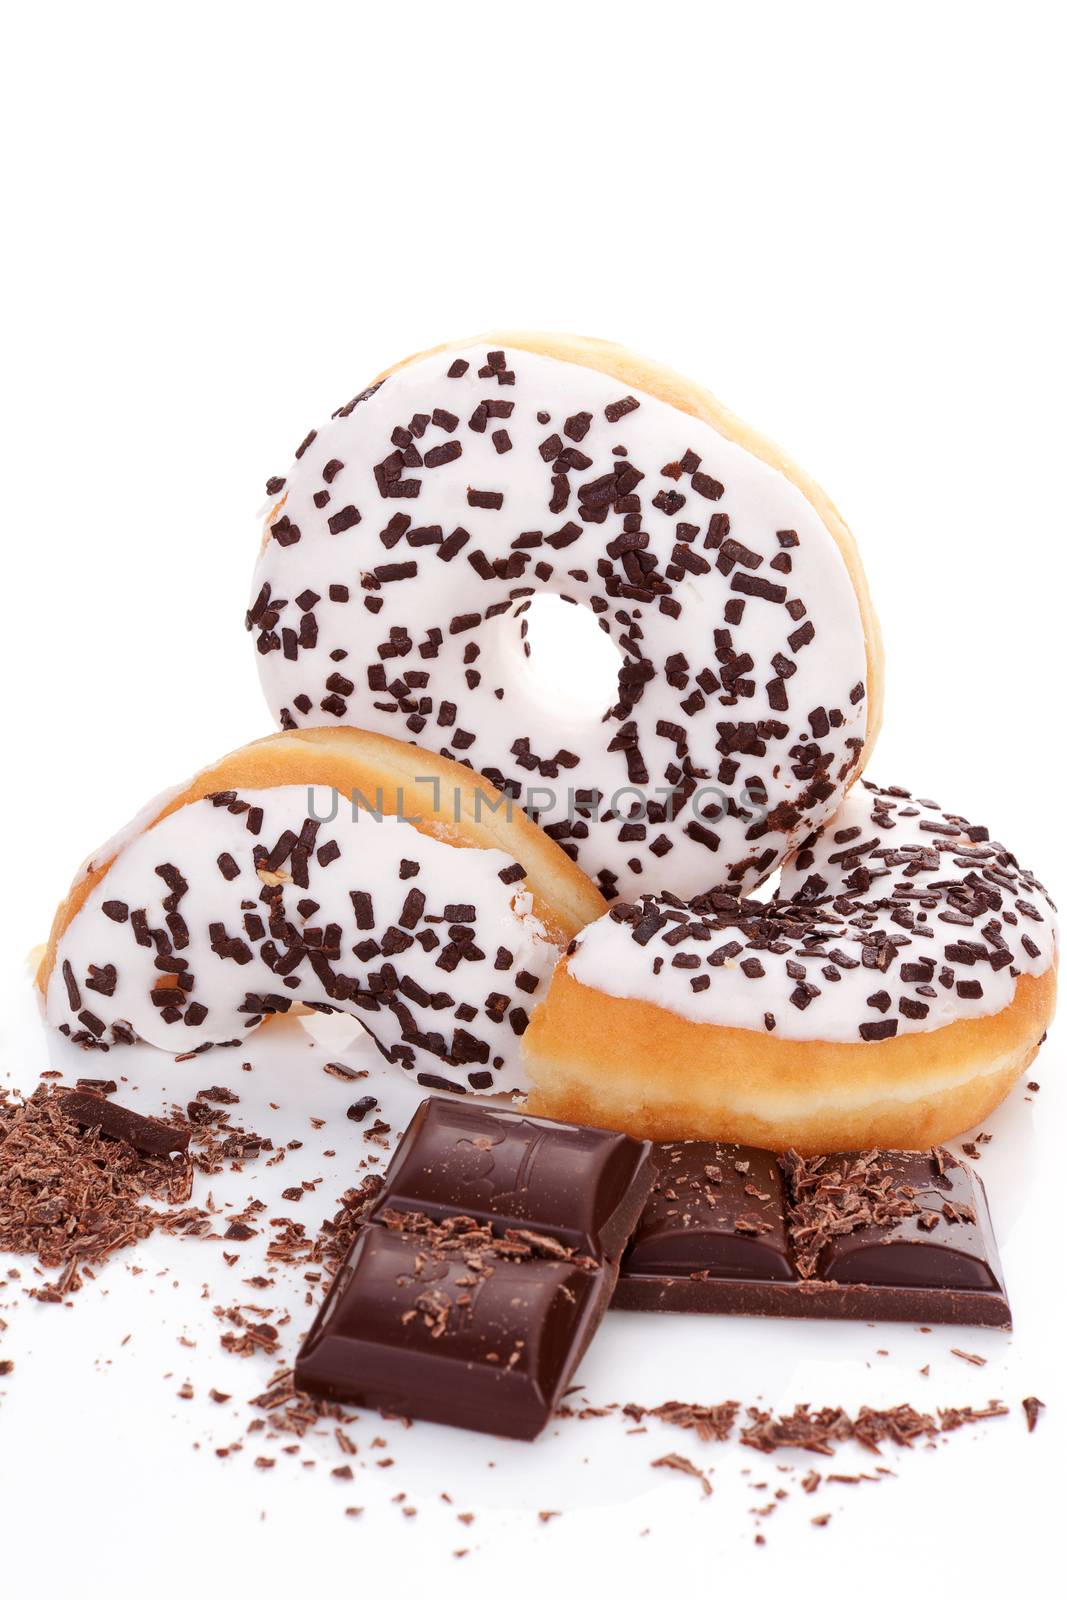 Chocolate donuts with chocolate bar isolated on white background. Delicious sweets.